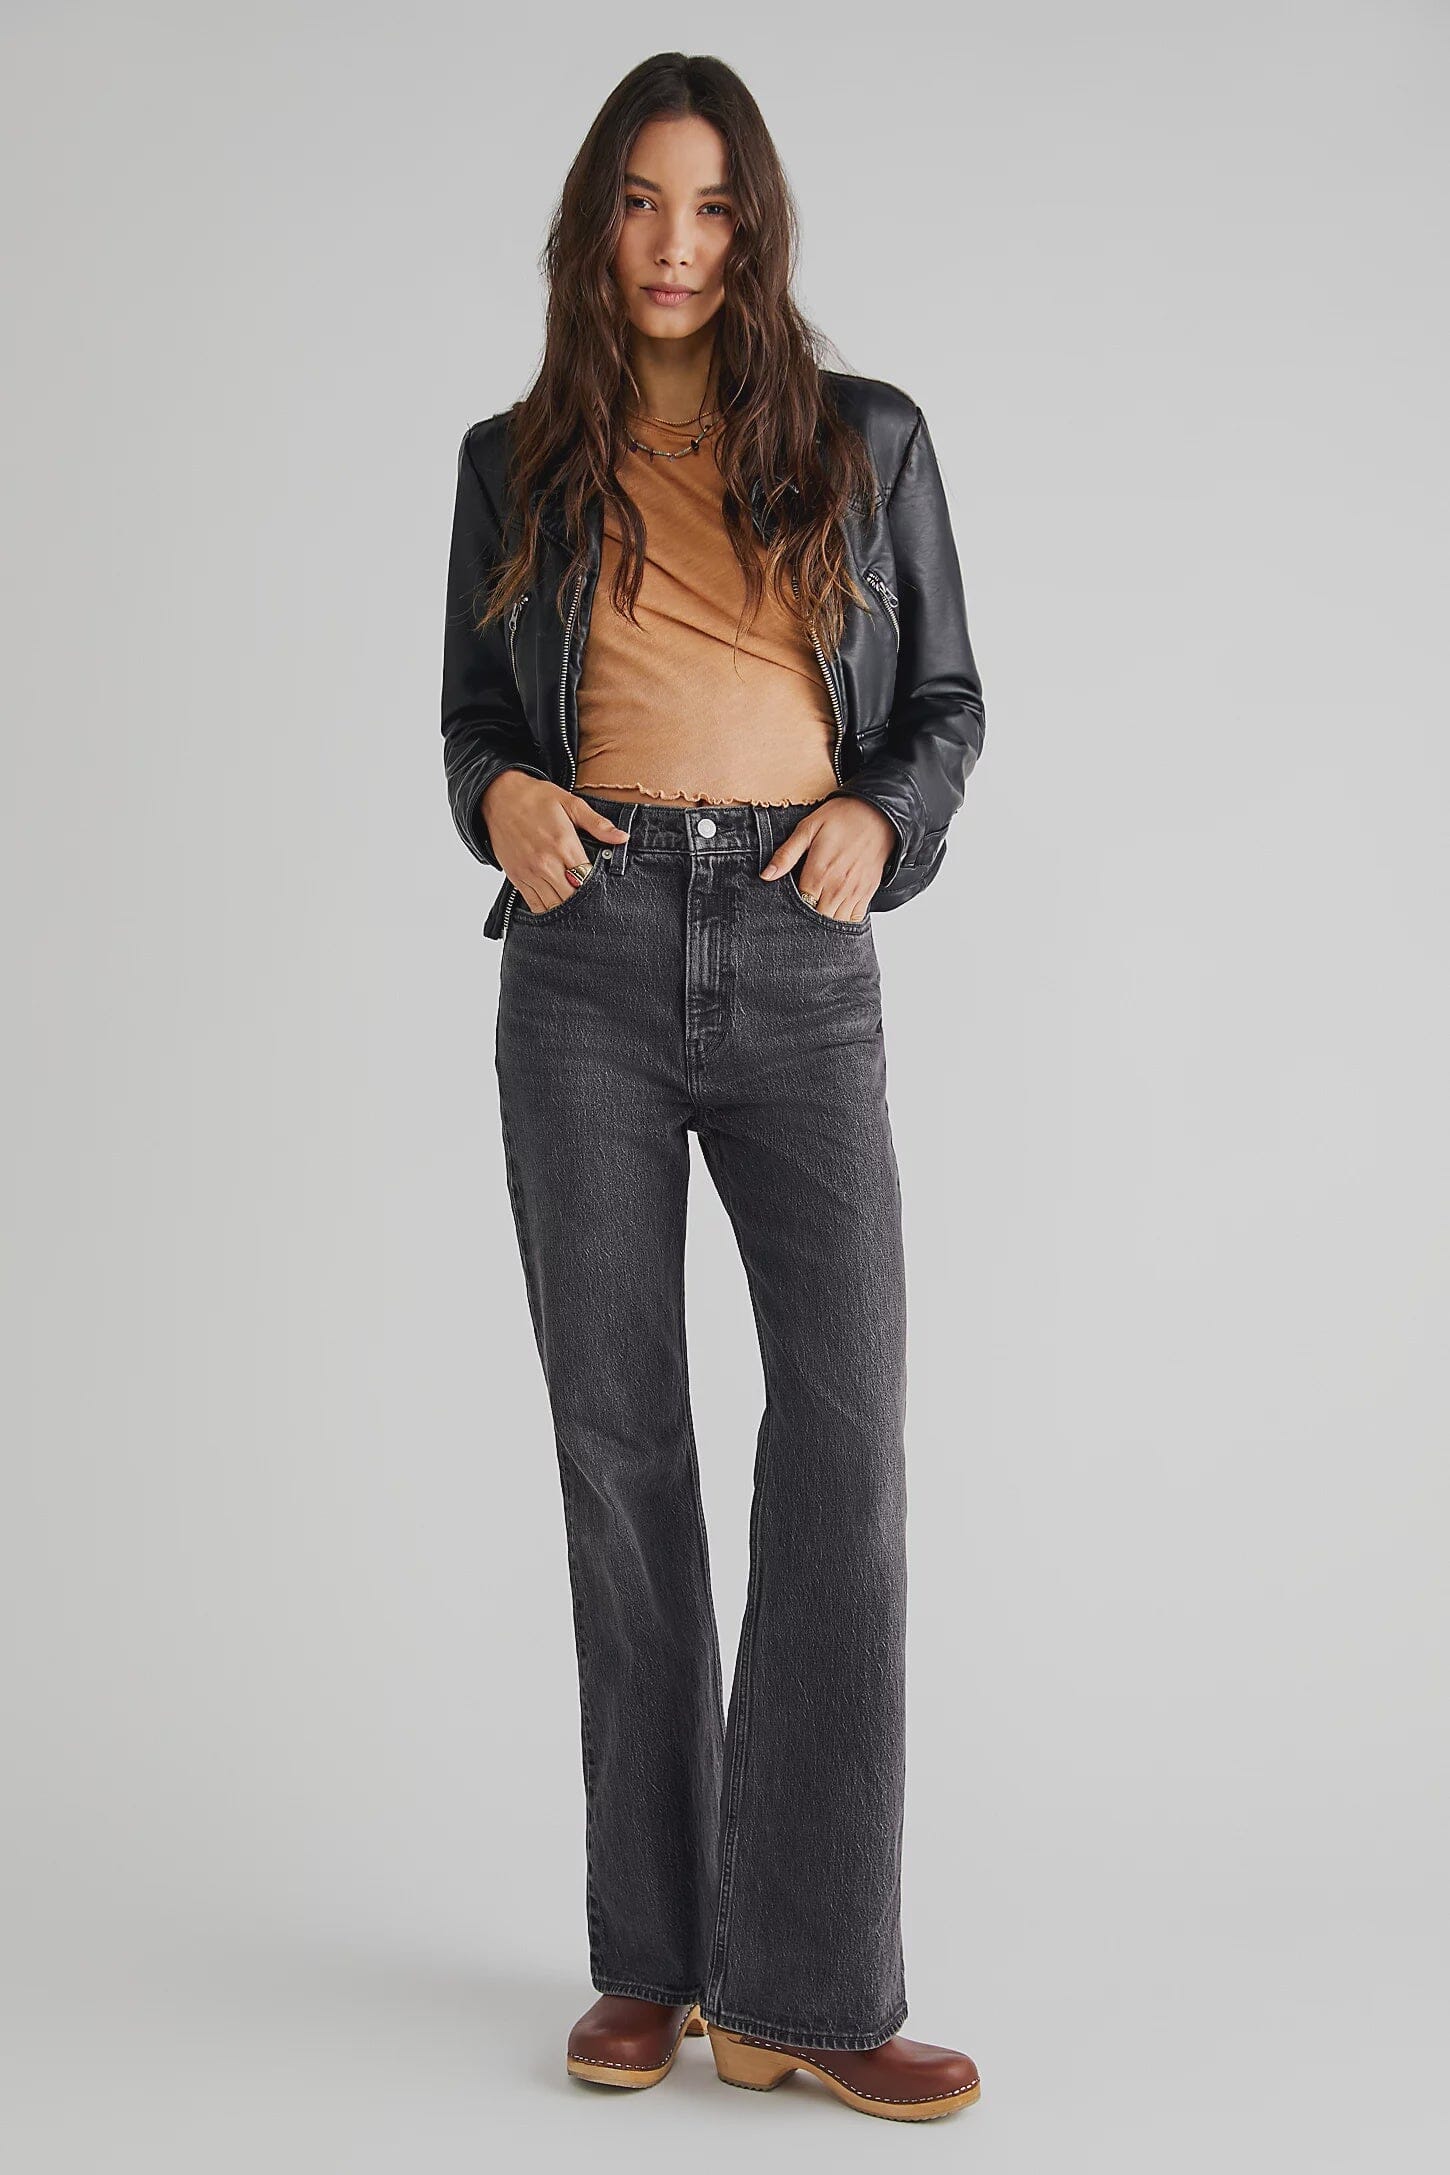 LEVI'S 70'S HIGH-RISE FLARE (JUST A HINT) DENIM LEVIS 